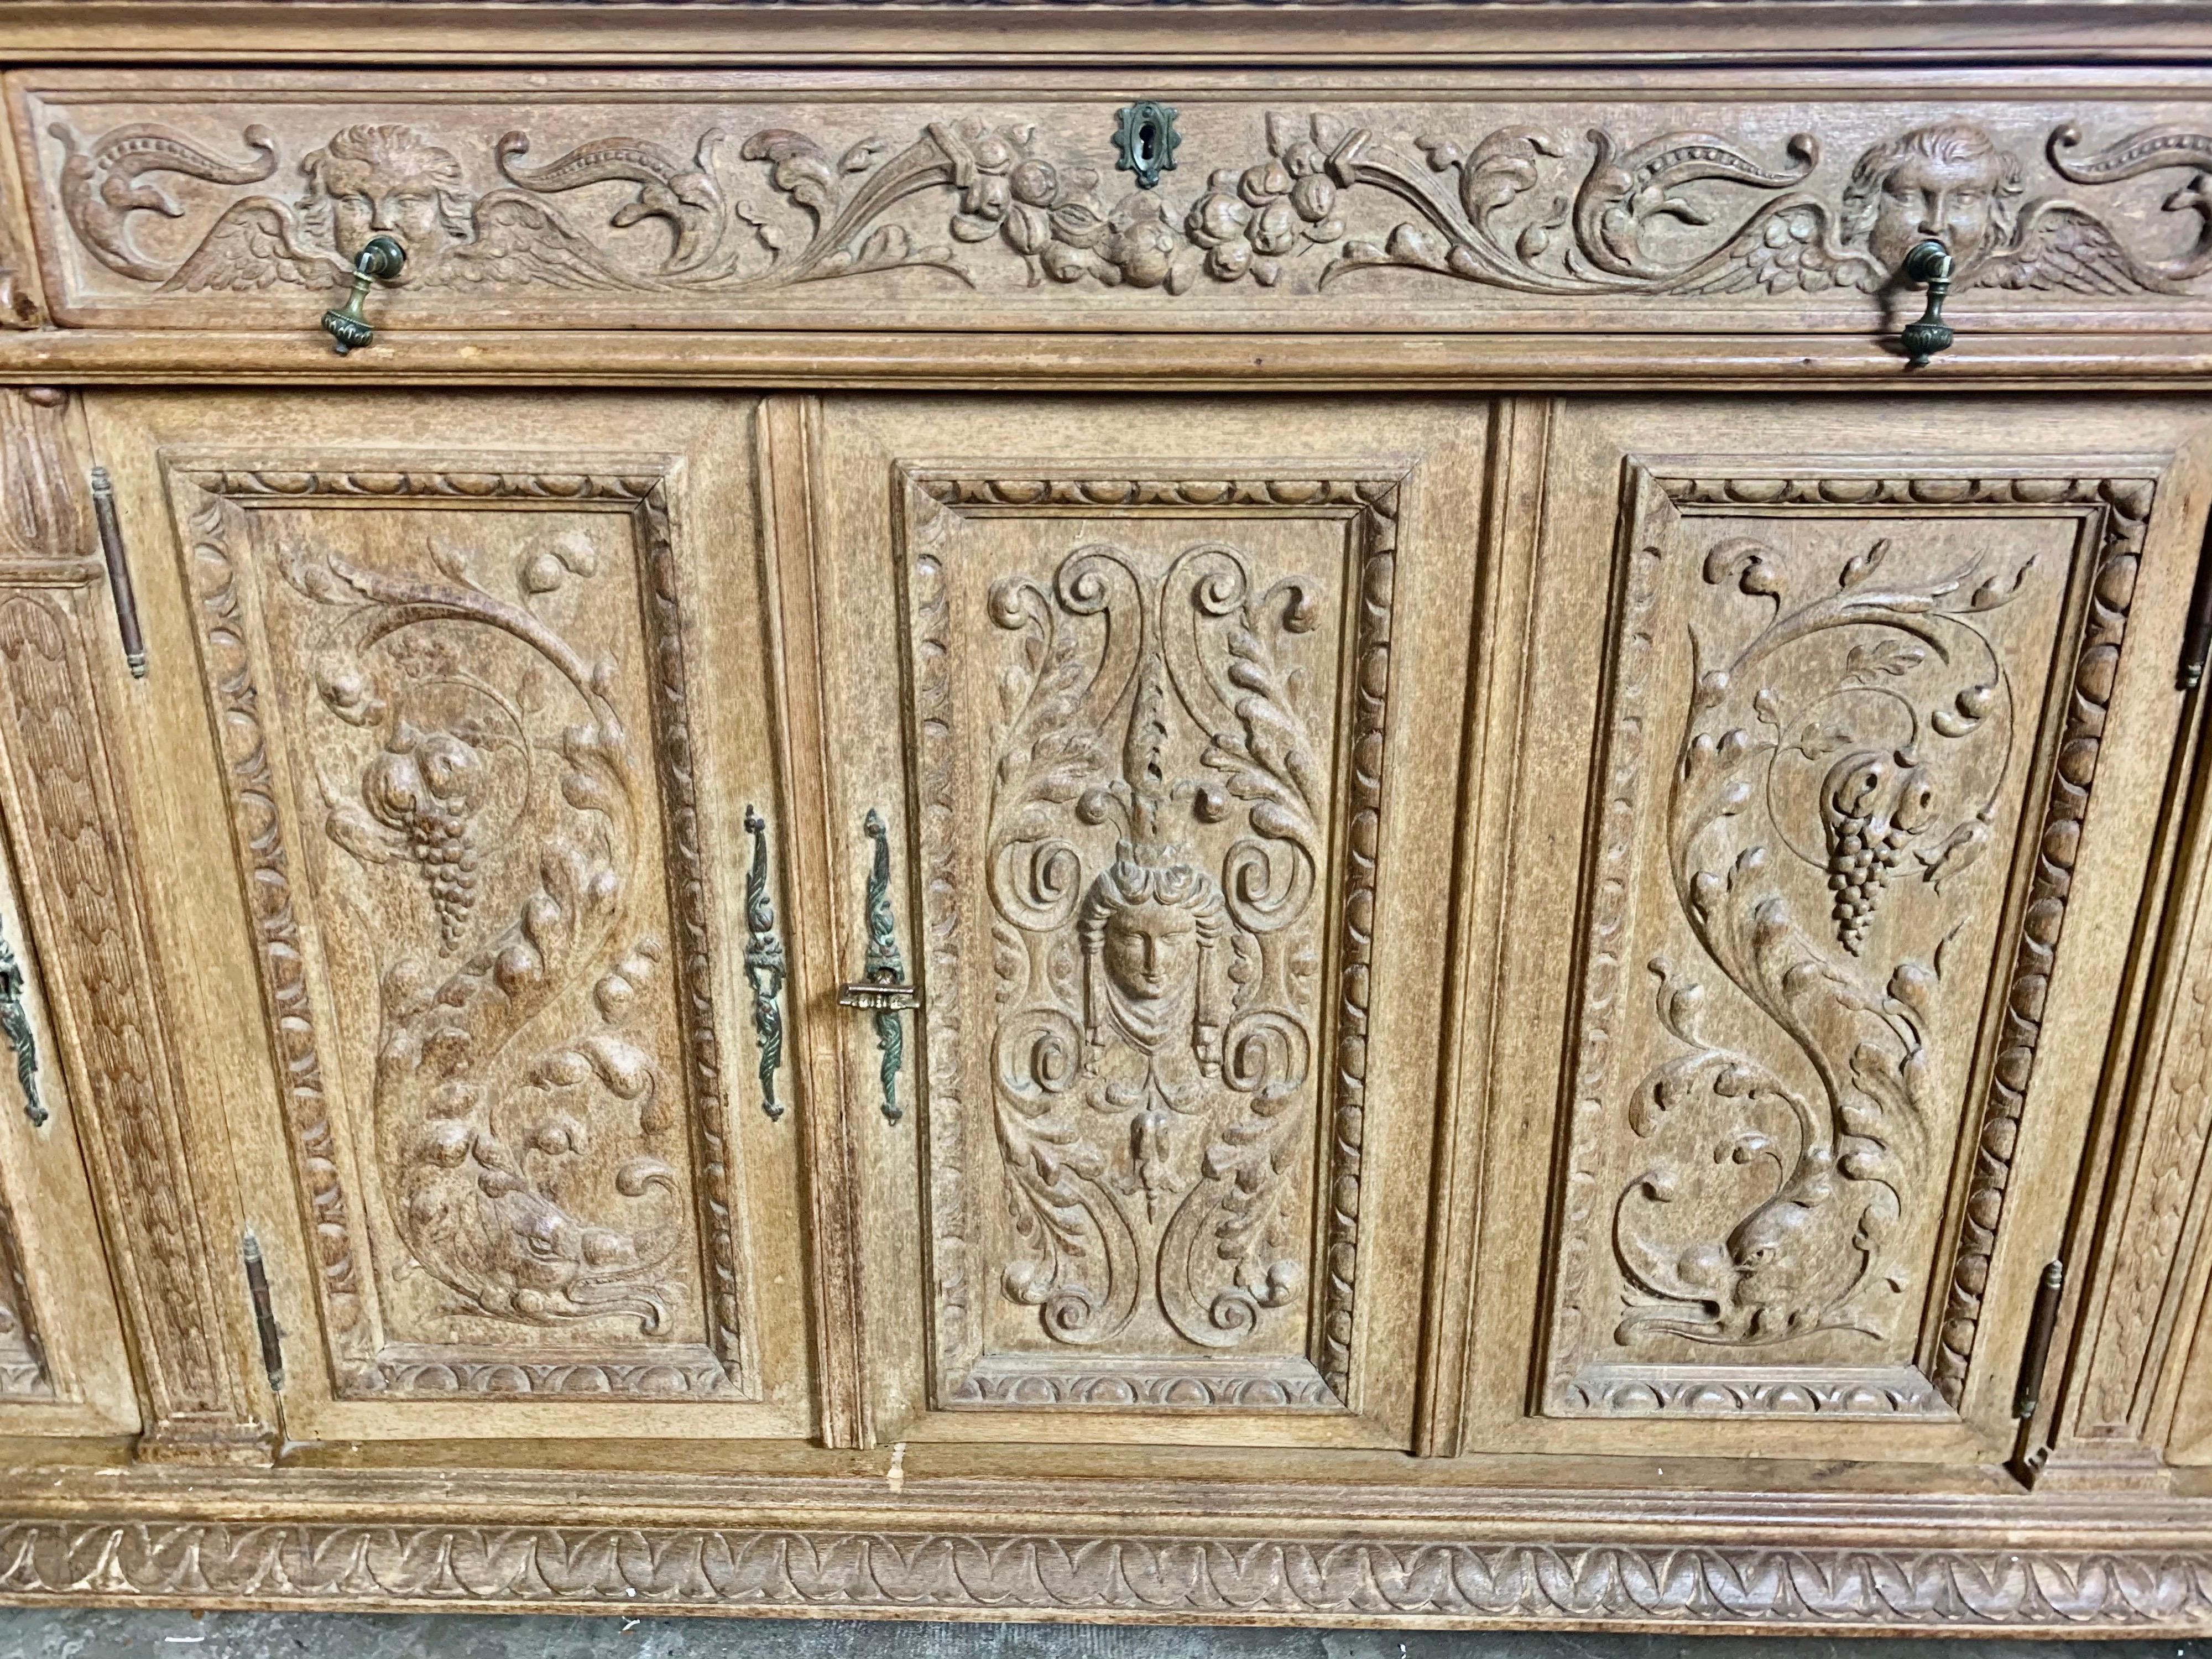 Italian bleached finely carved walnut credenza depicting grape vines, cherubs, scrolled acanthus leaves, faces and so much more. This piece has drawers and plenty of storage underneath. The credenza holds a black marble top with gold accents and